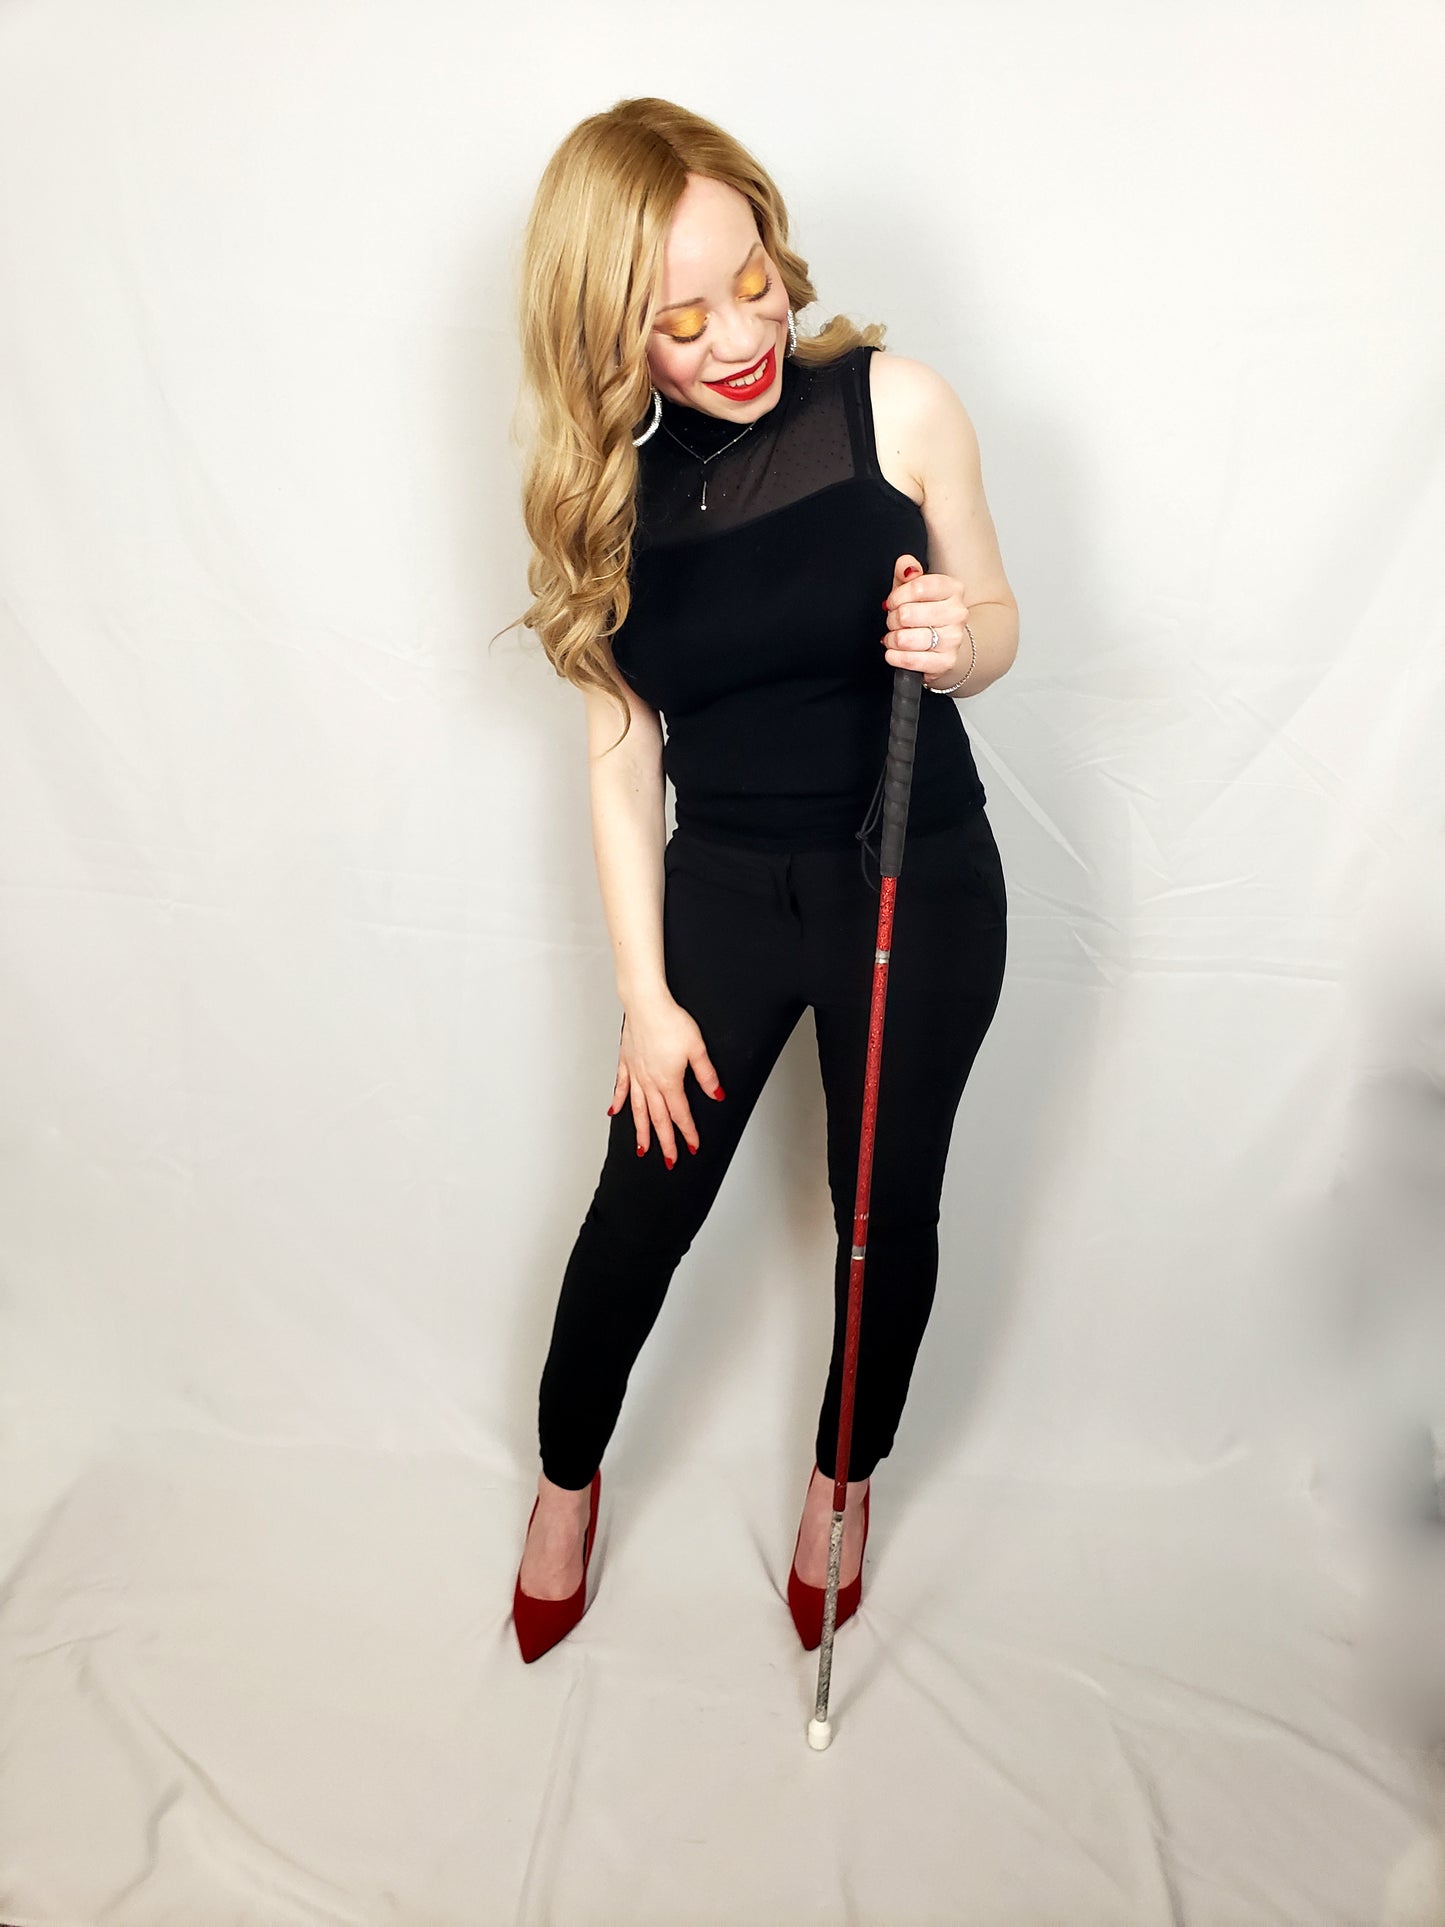 A woman poses confidently holding a rhinestone glam cane with a custom red upper 2/3 of the cane and white lower 1/3 of the cane design to match her red lipstick, nails, and red shoes.